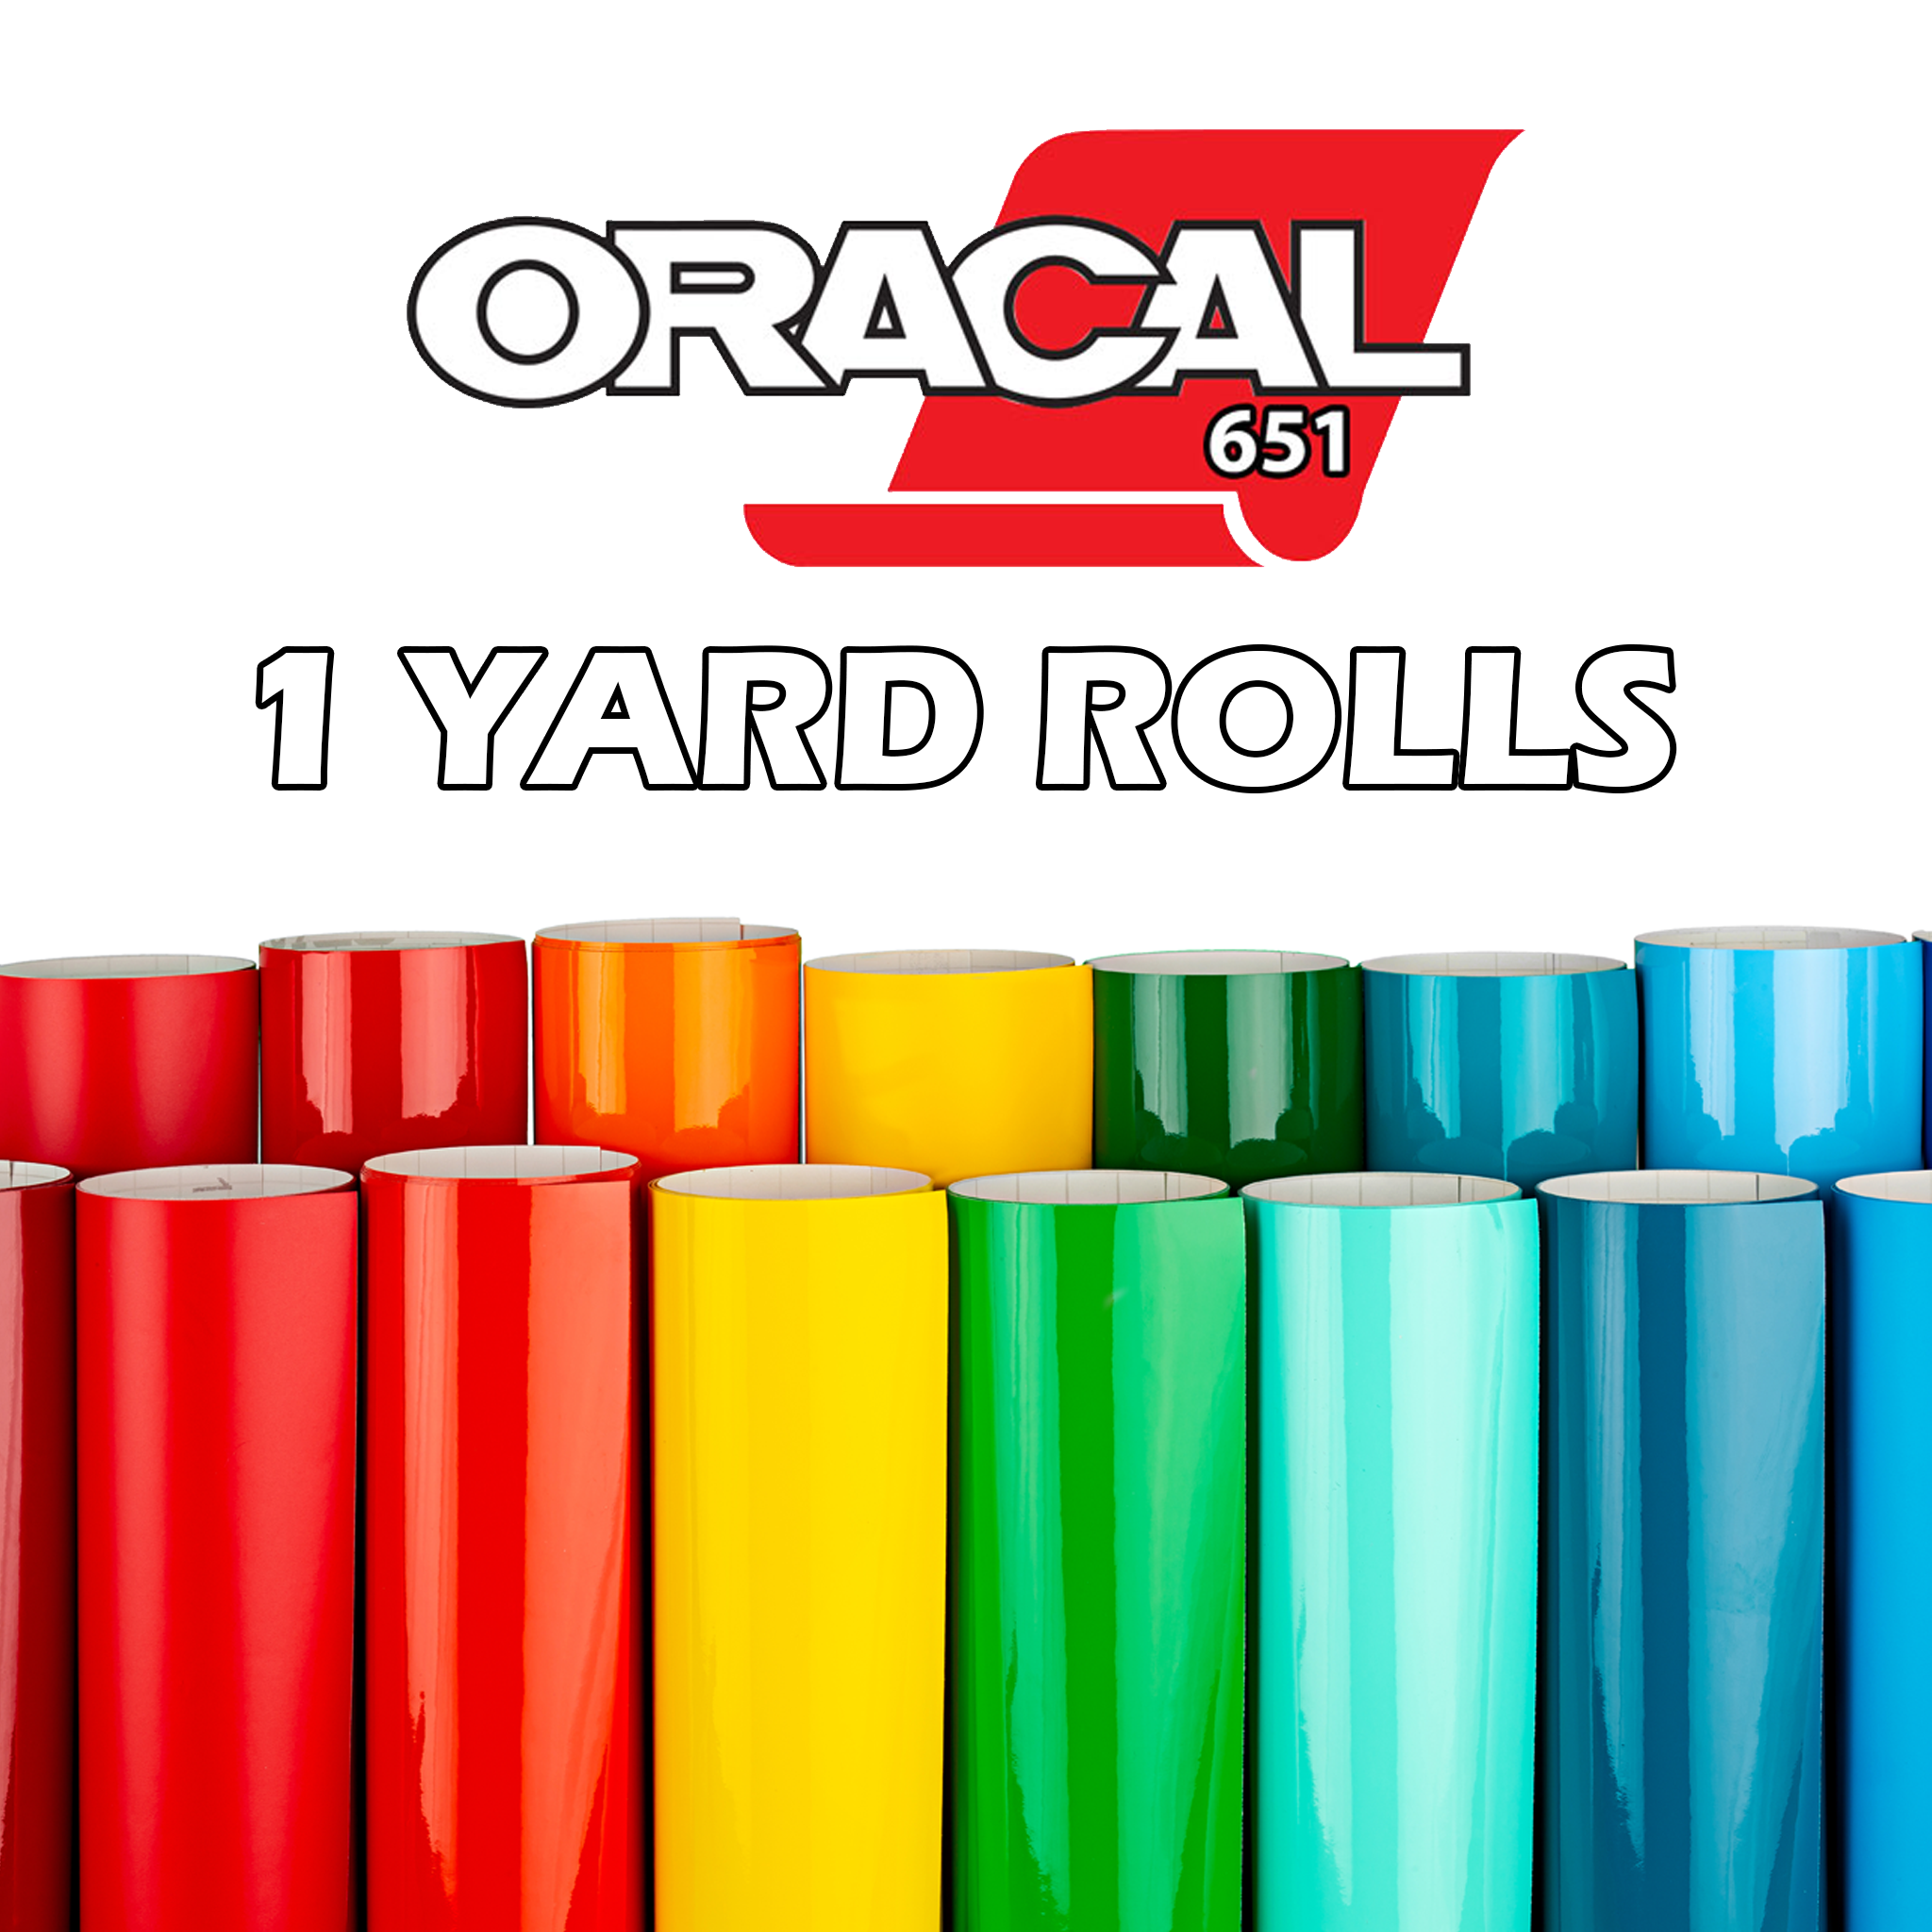 Oracal 651 Adhesive Vinyl Roll in the 15 Inch x 10 Yard Roll Size